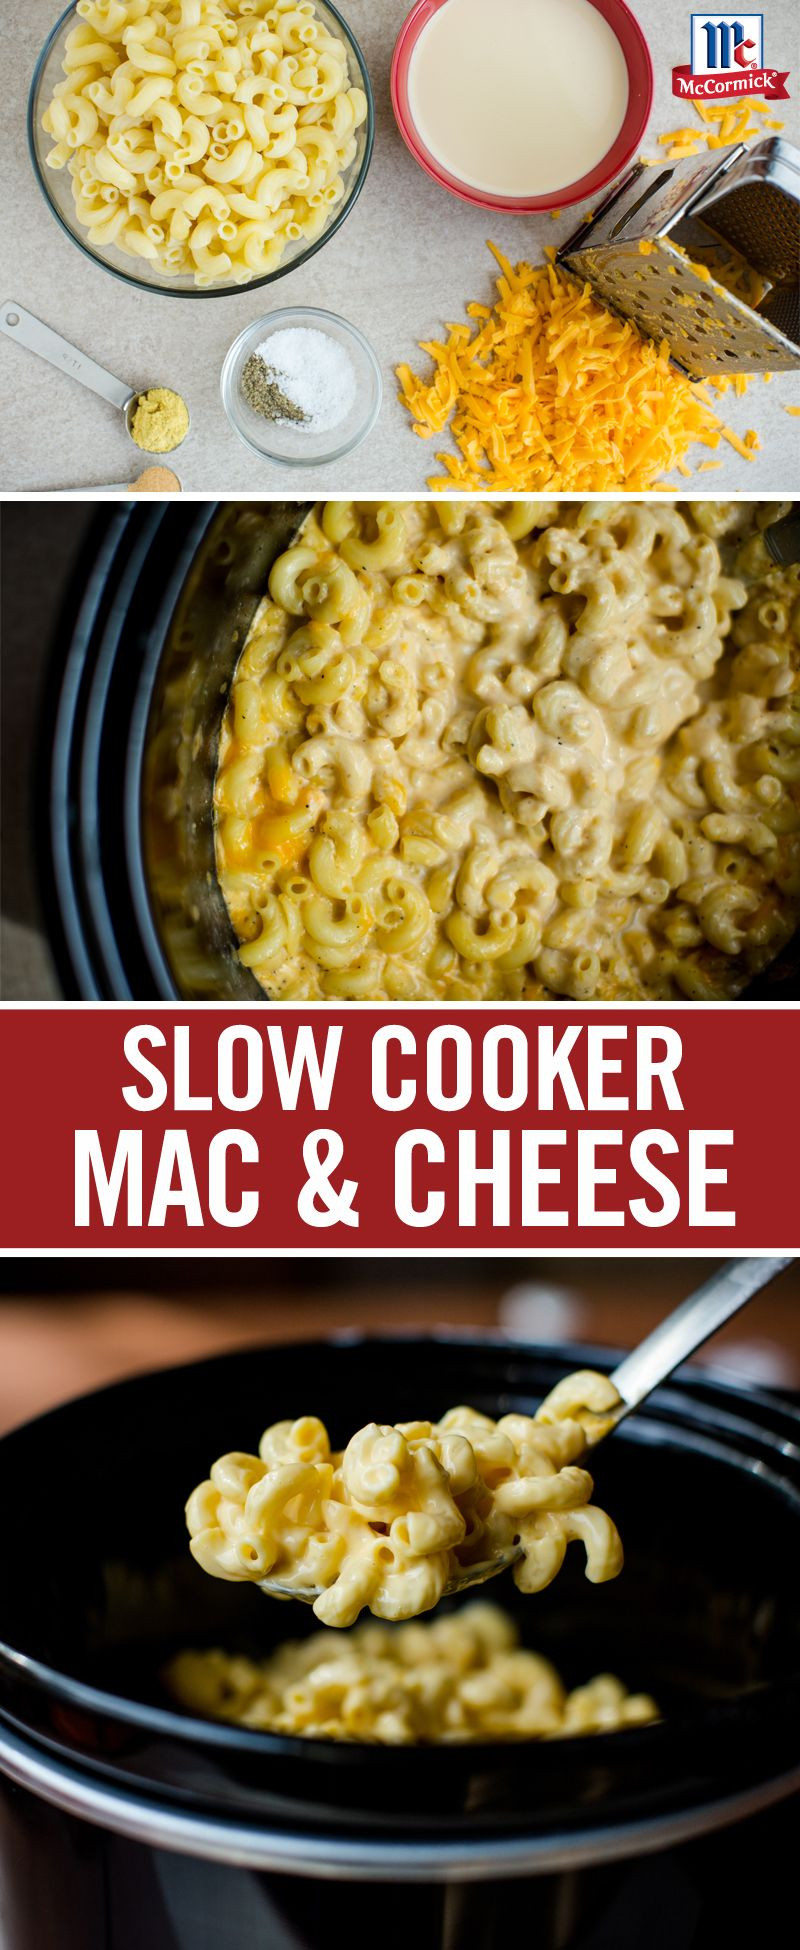 Slow Cooker Thanksgiving Side Dishes
 Slow Cooker Mac and Cheese Recipe